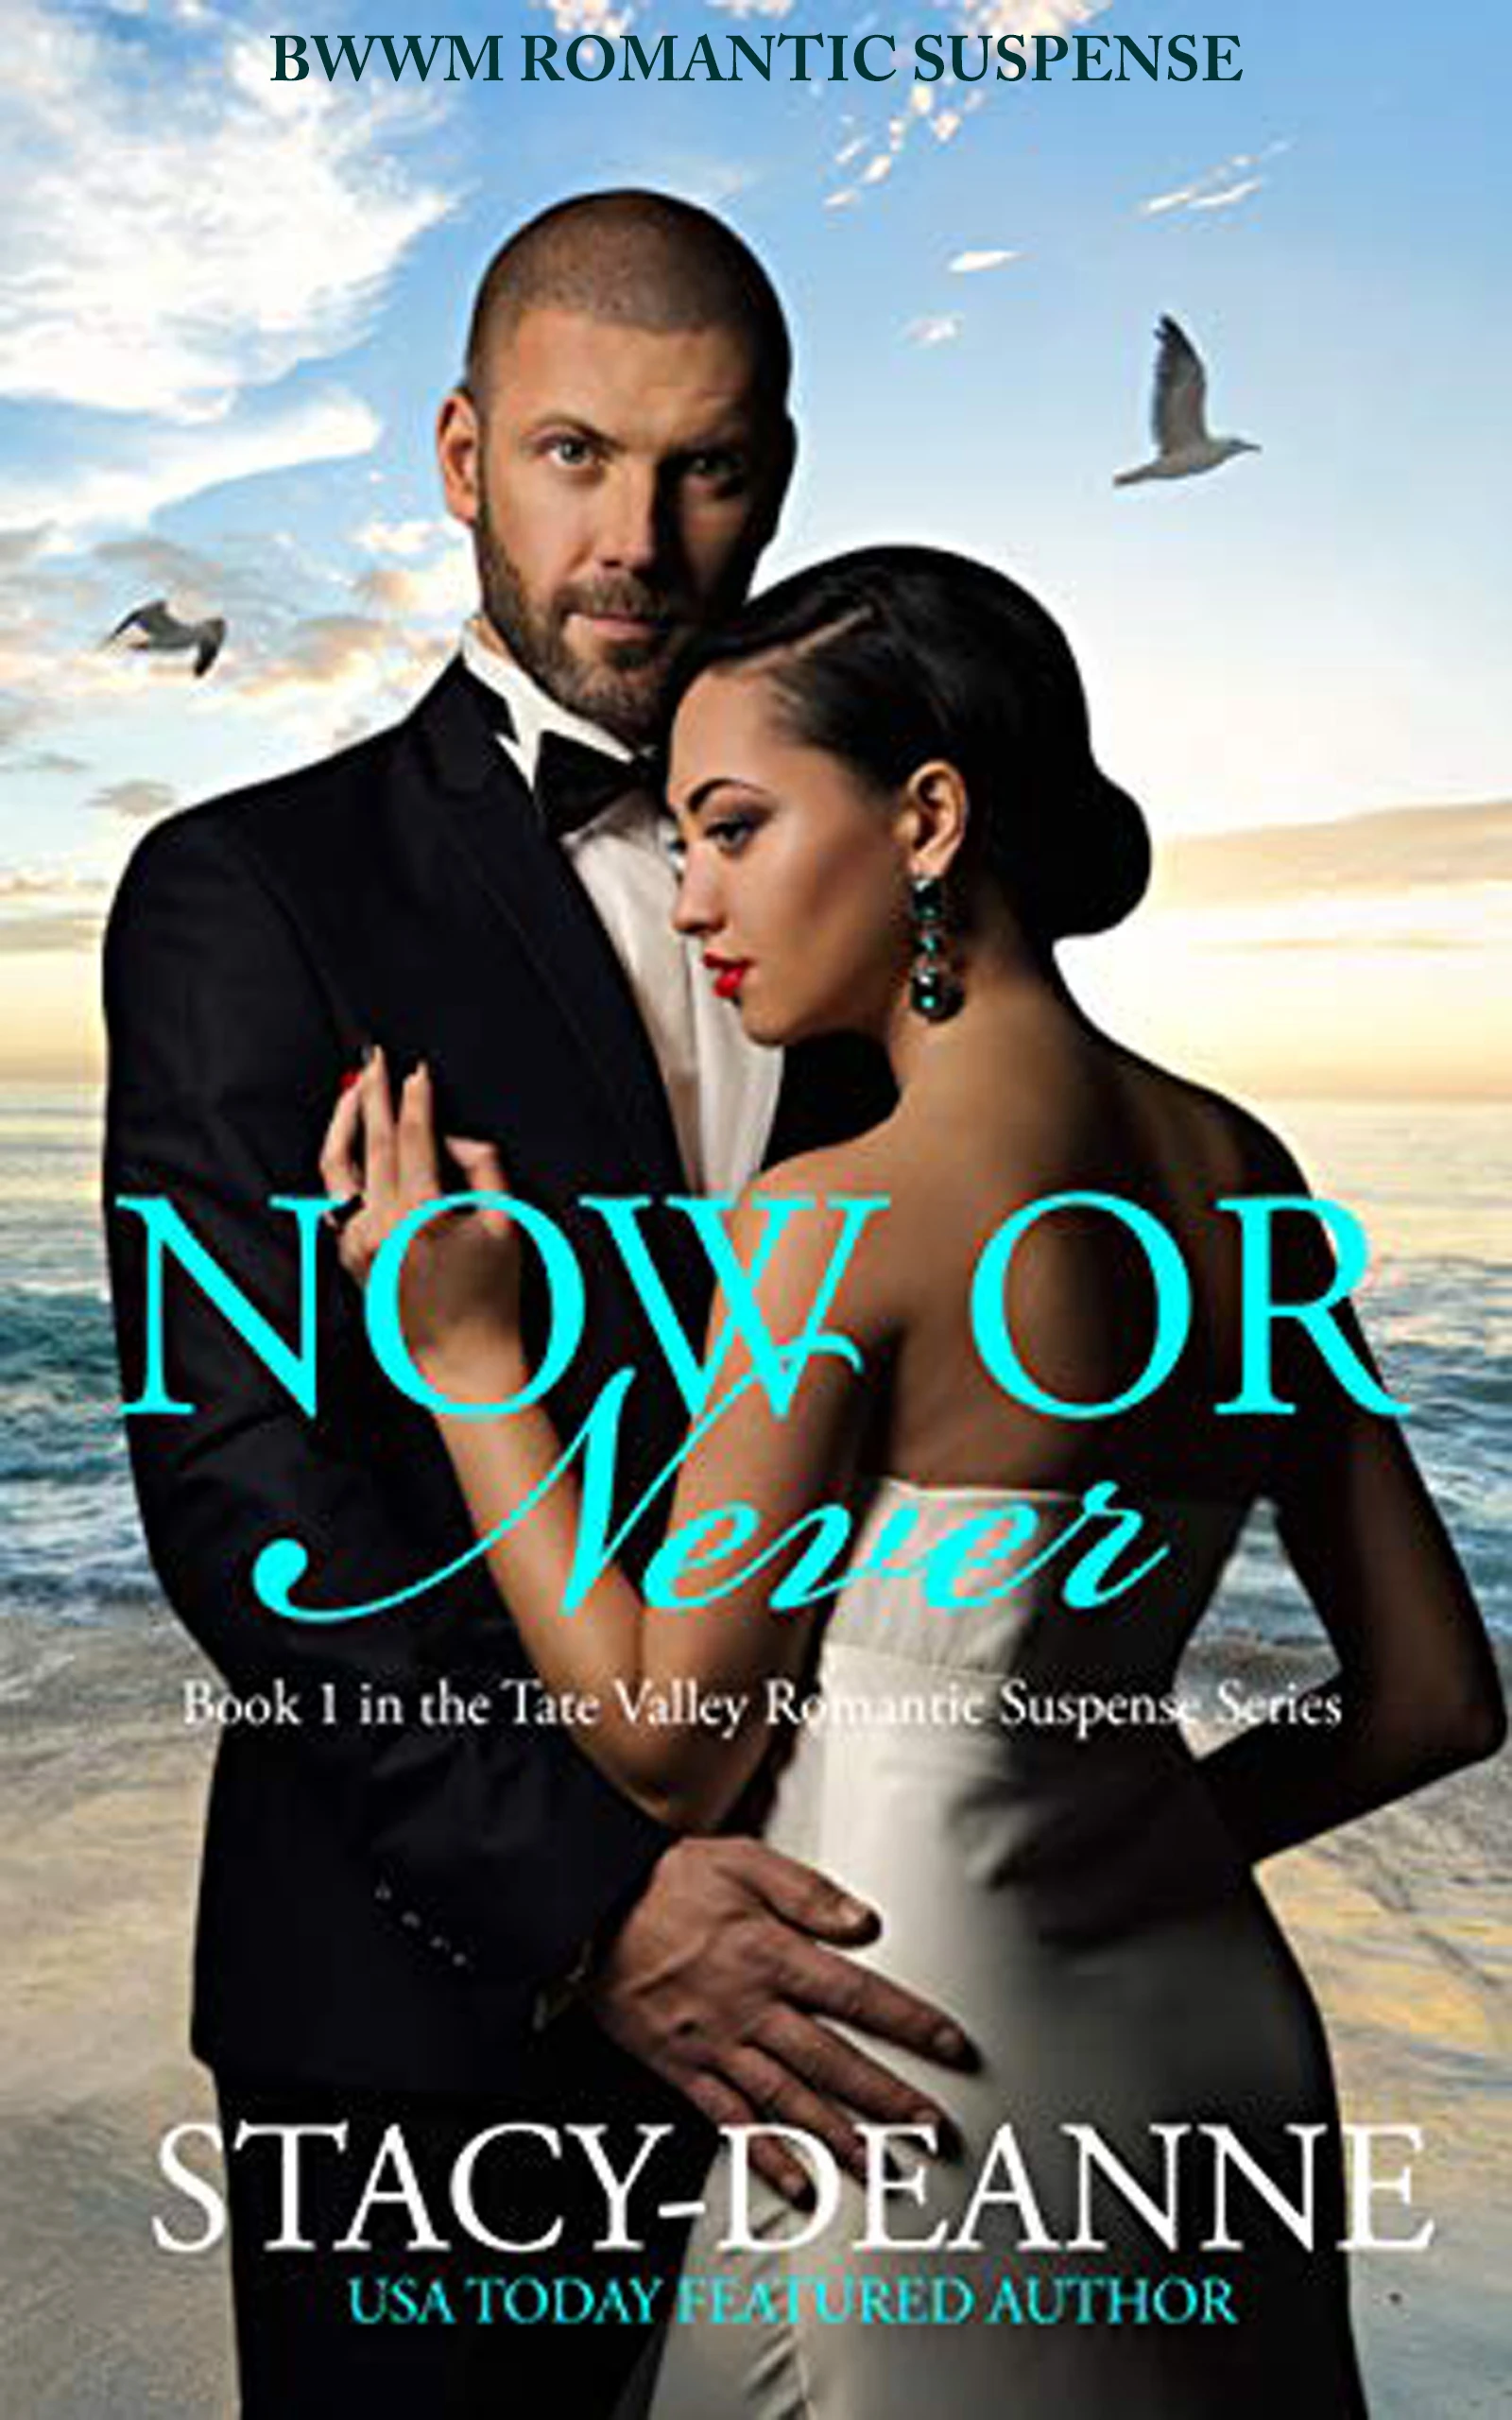 Now or Never (Tate Valley Romantic Suspense Series Book 1)